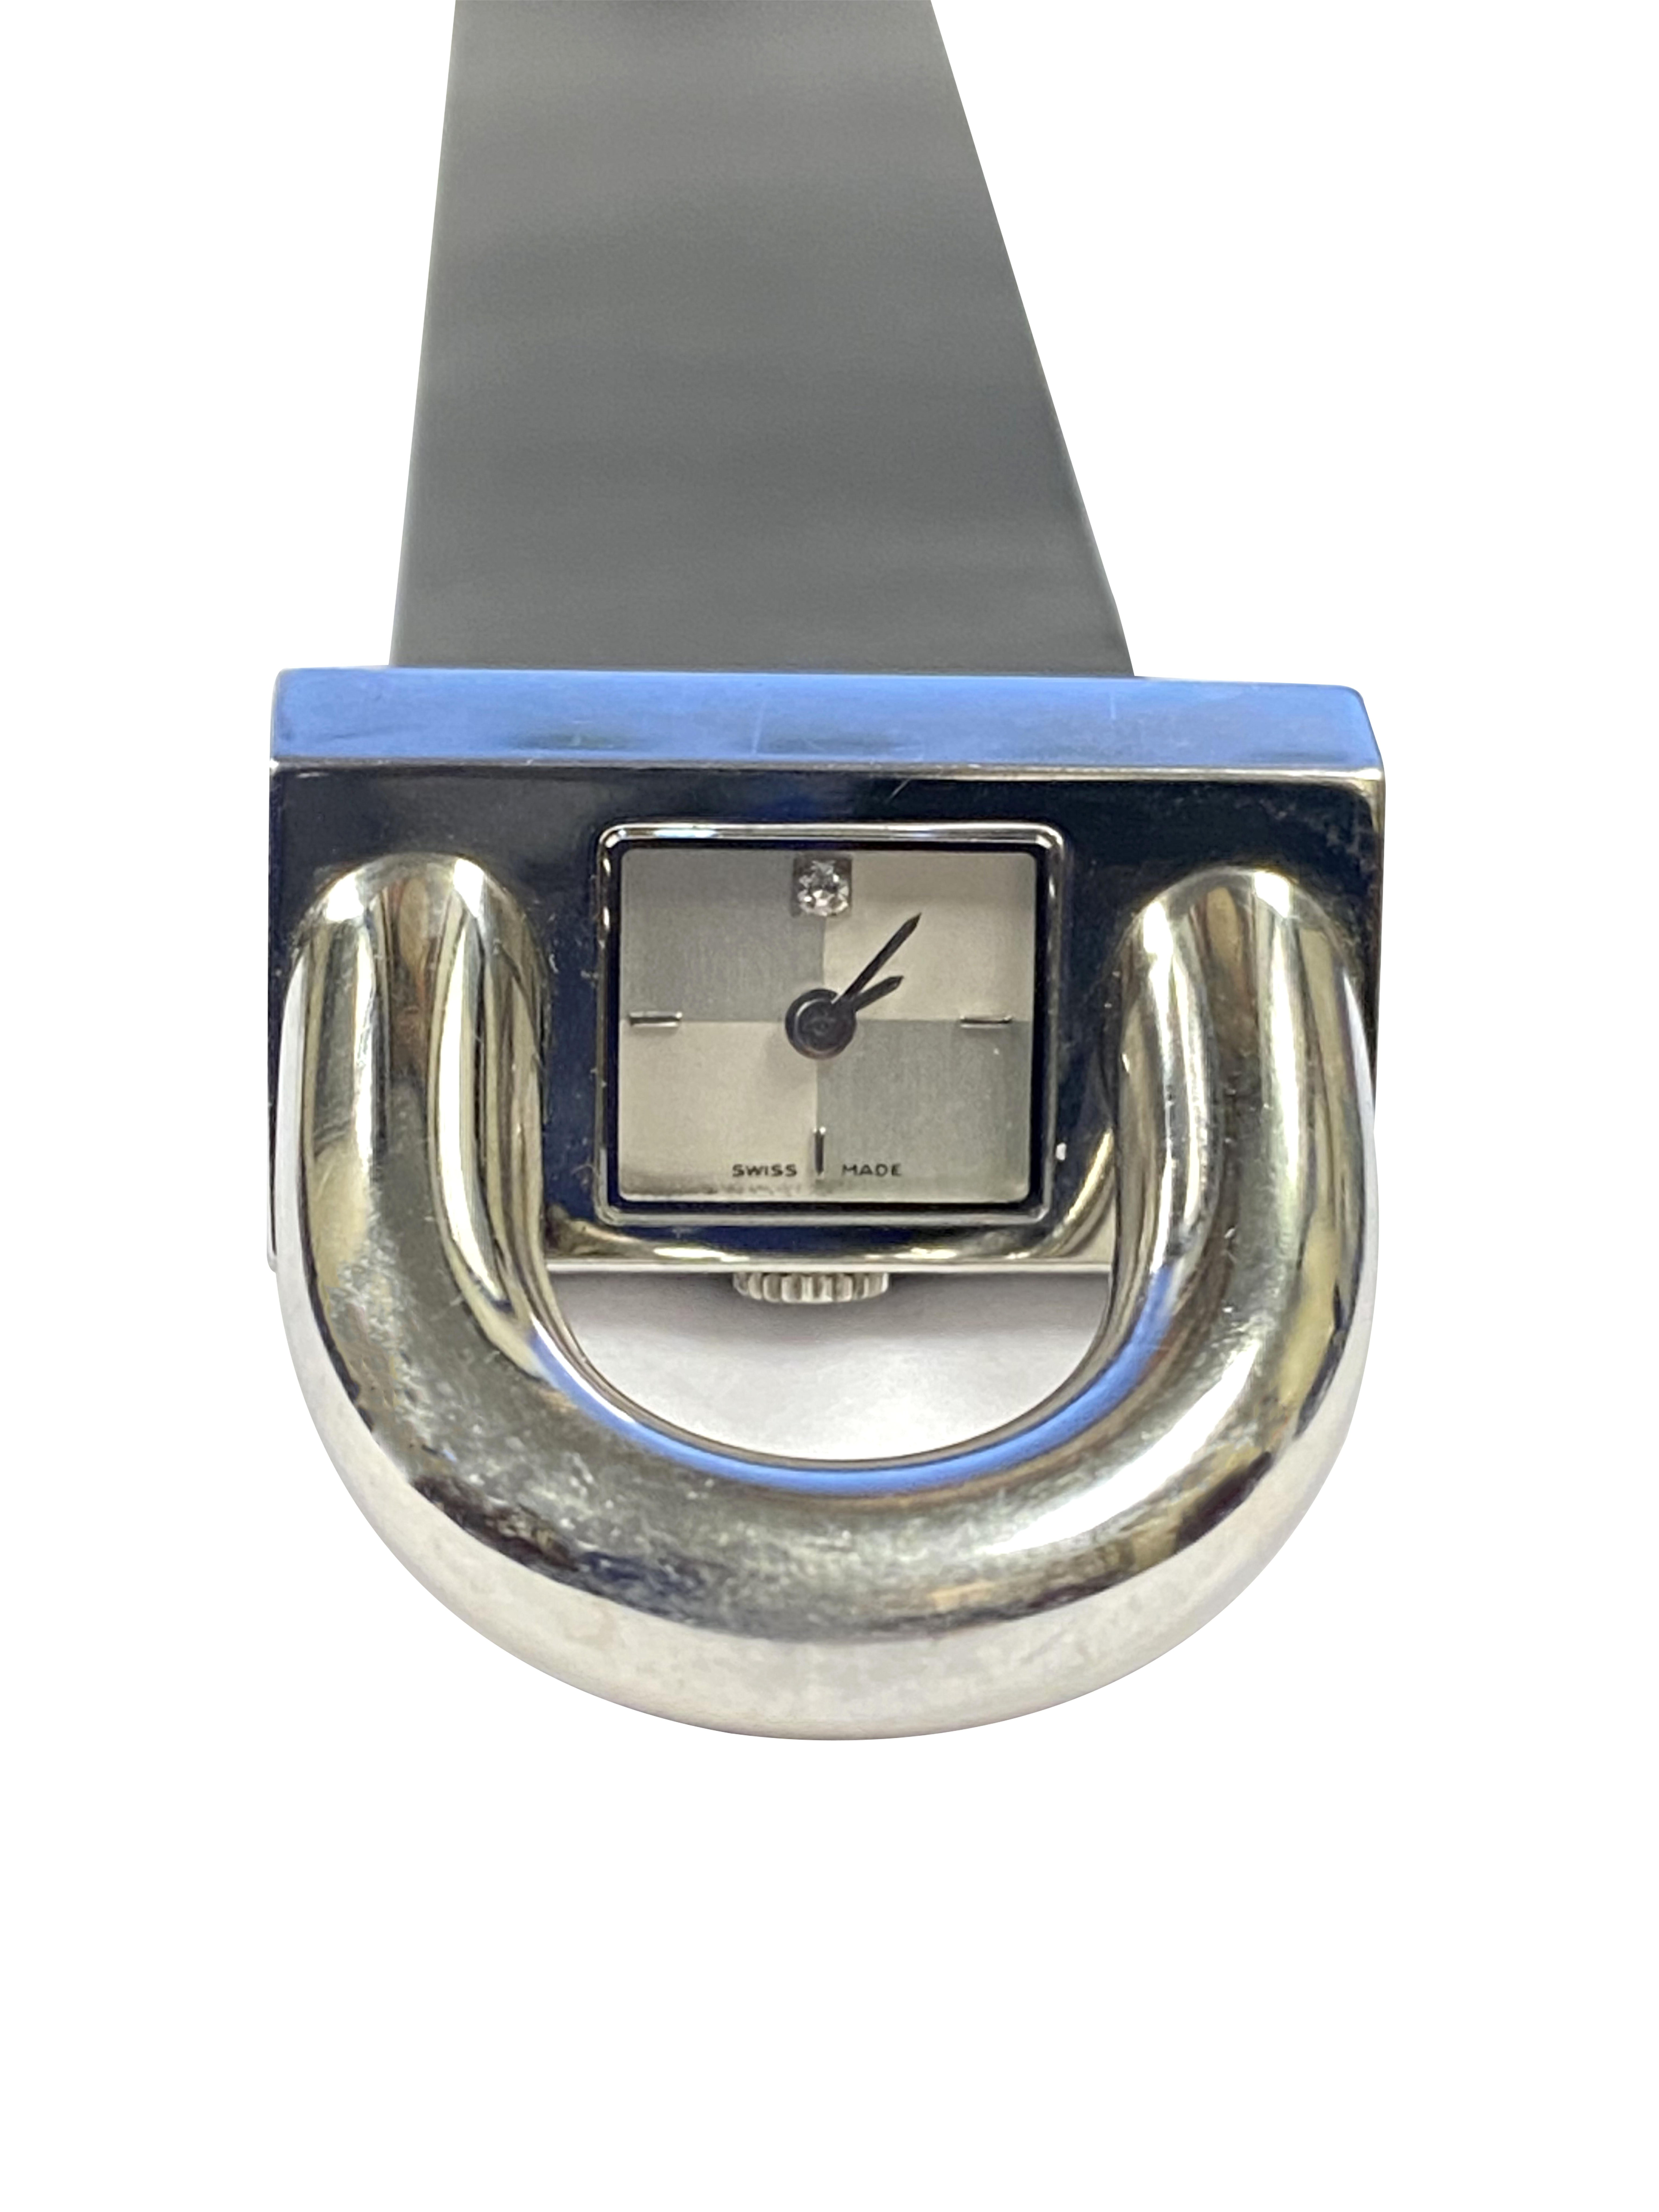 Circa 2015 Van Cleef & Arpels Cadenas Ladies Wrist watch, the Stainless Steel watch case portion measures 1 1/2 X  1 inch wide. Quartz Movement, Gray and Silver Satin Dial with a Diamond set at the 12.  7/8 inch wide Black leather Strap. Comes with